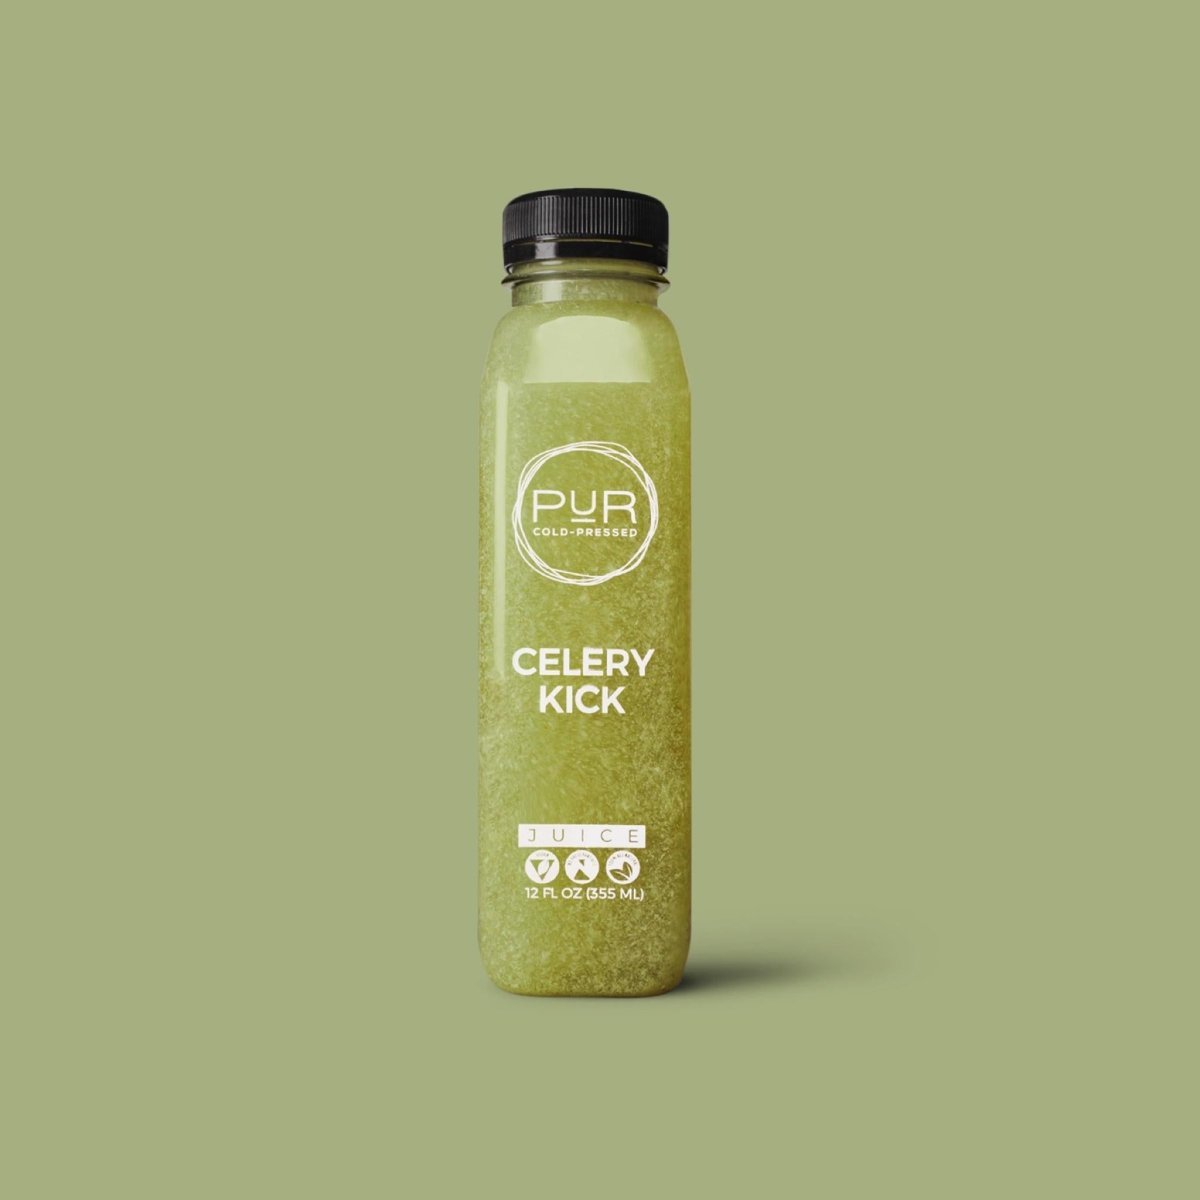 PUR juice cleanse cold pressed juice HANGOVER & WELLNESS CUR (JUICE + SHOTS) Hangover Detox Juice Shots | Cold-Pressed Juice | PUR Juice Kit